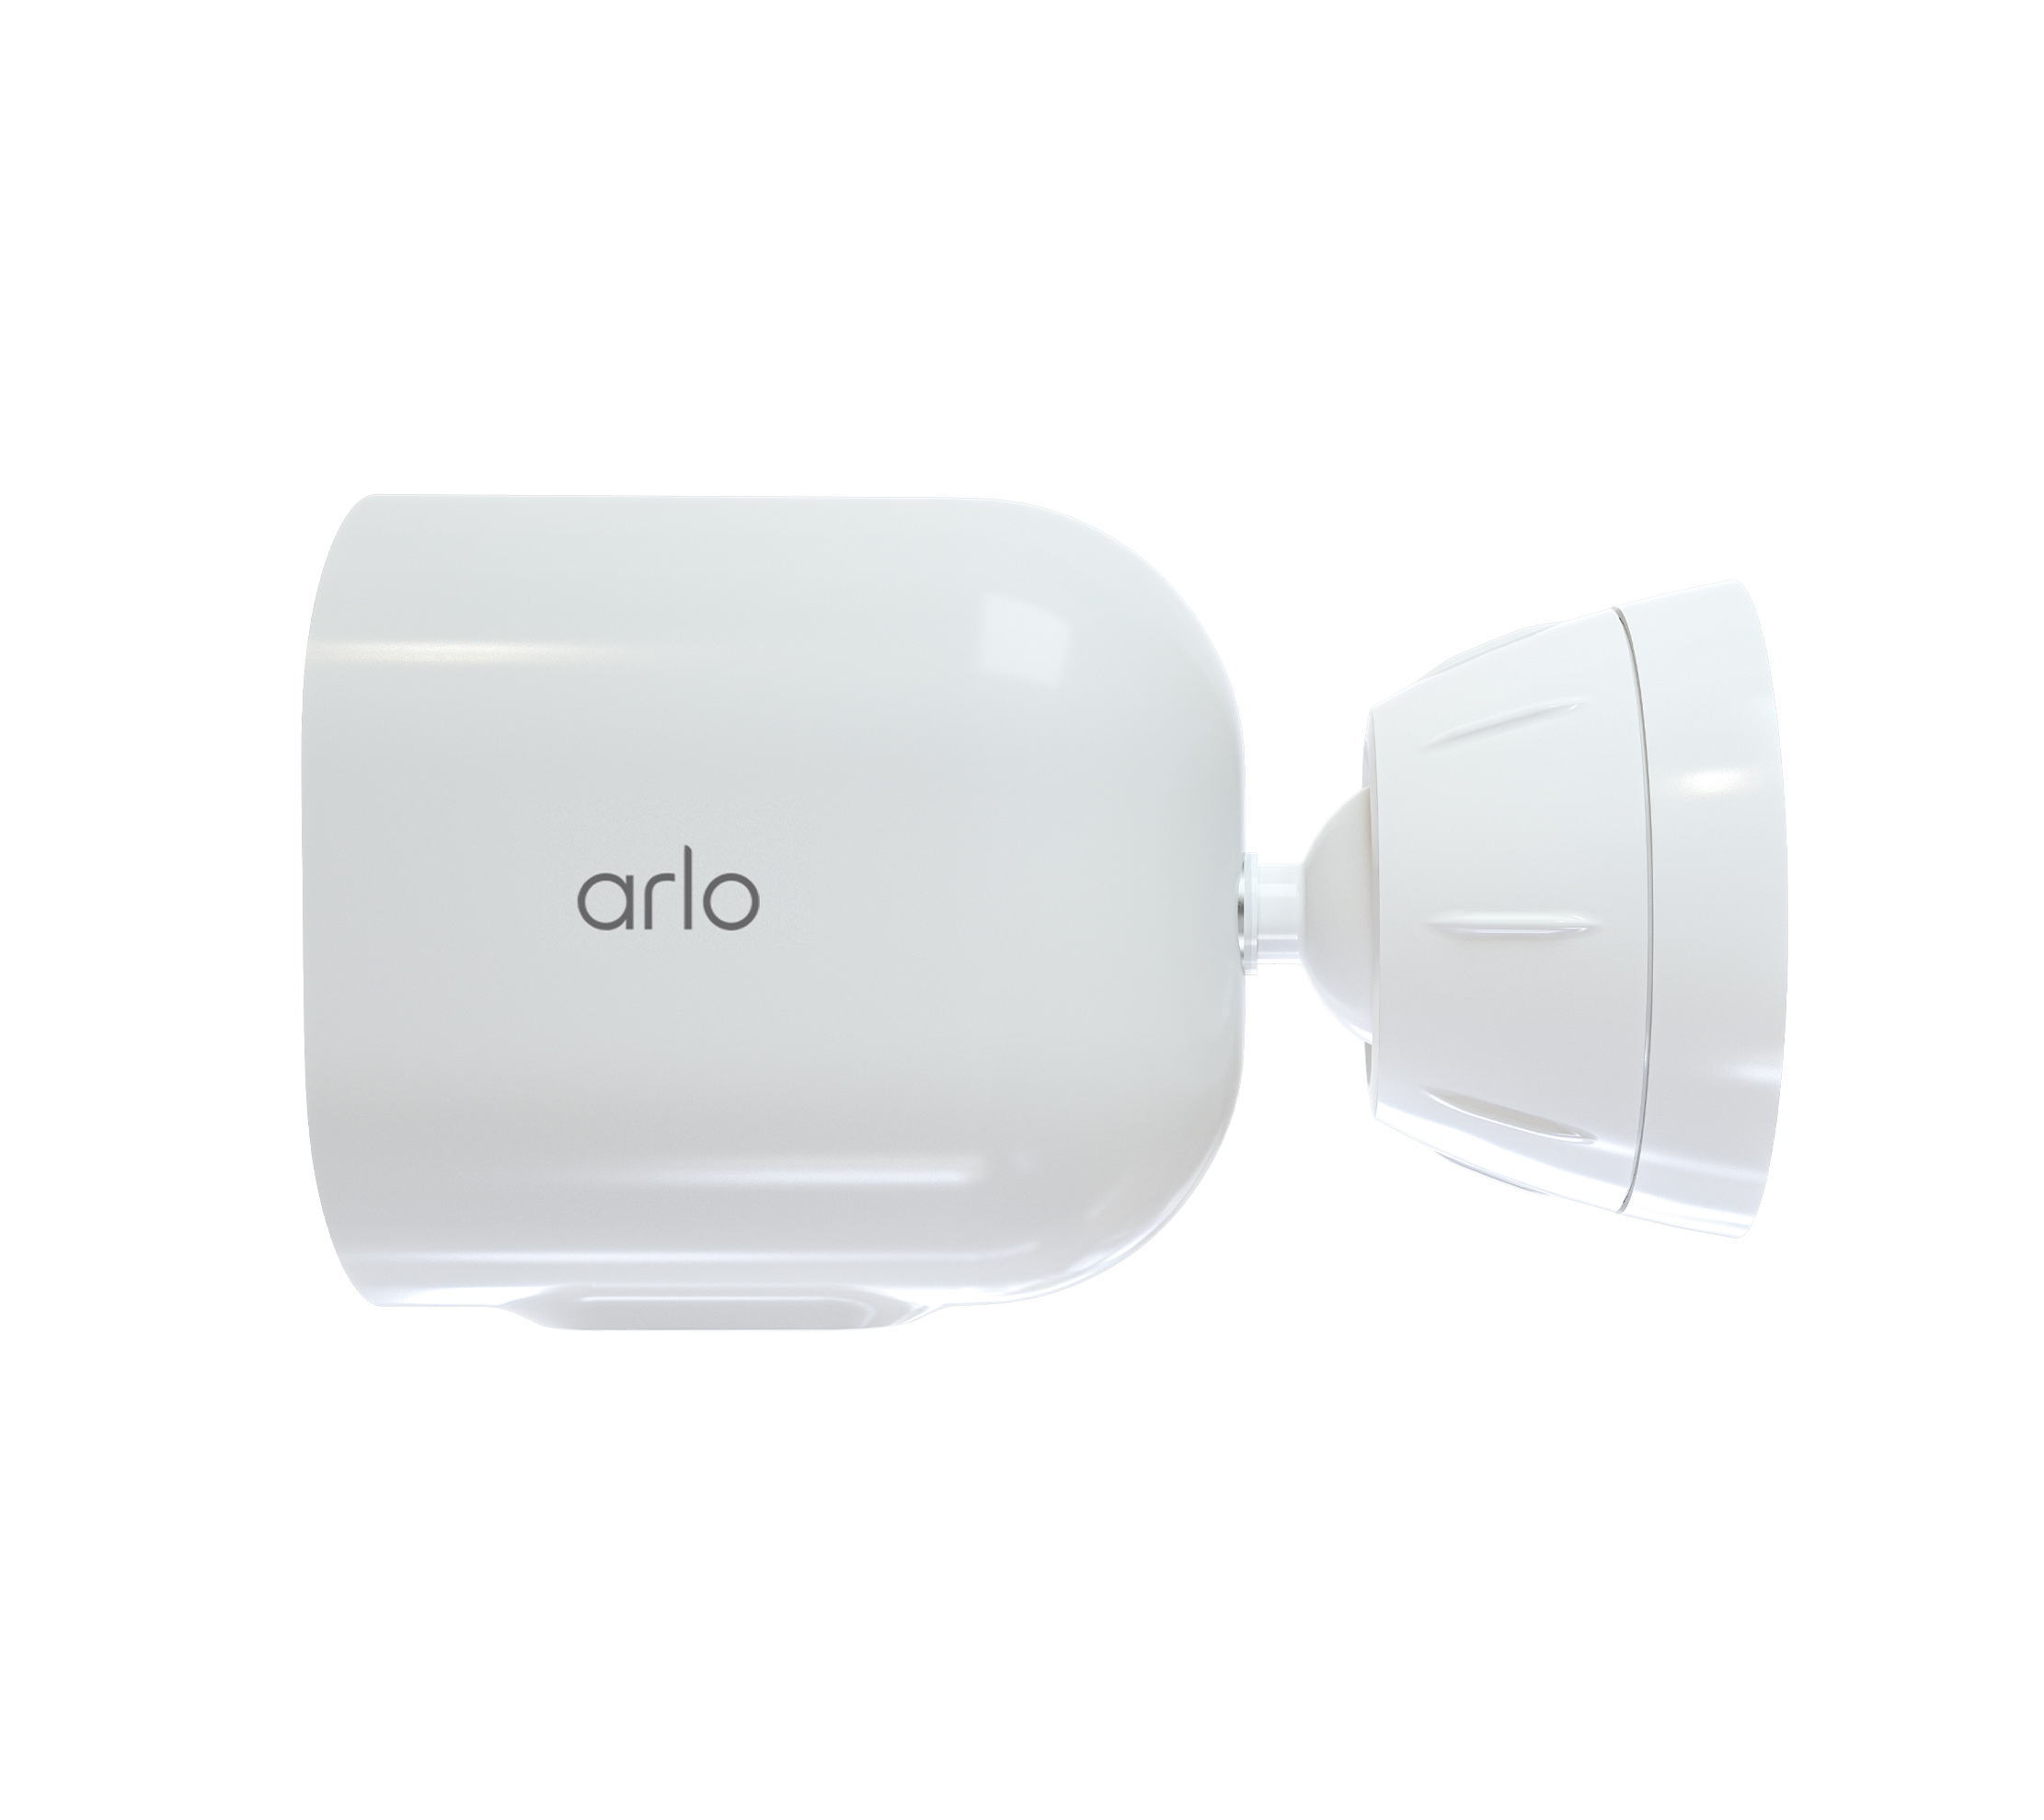 Arlo Security Camera Accessories | Chargers